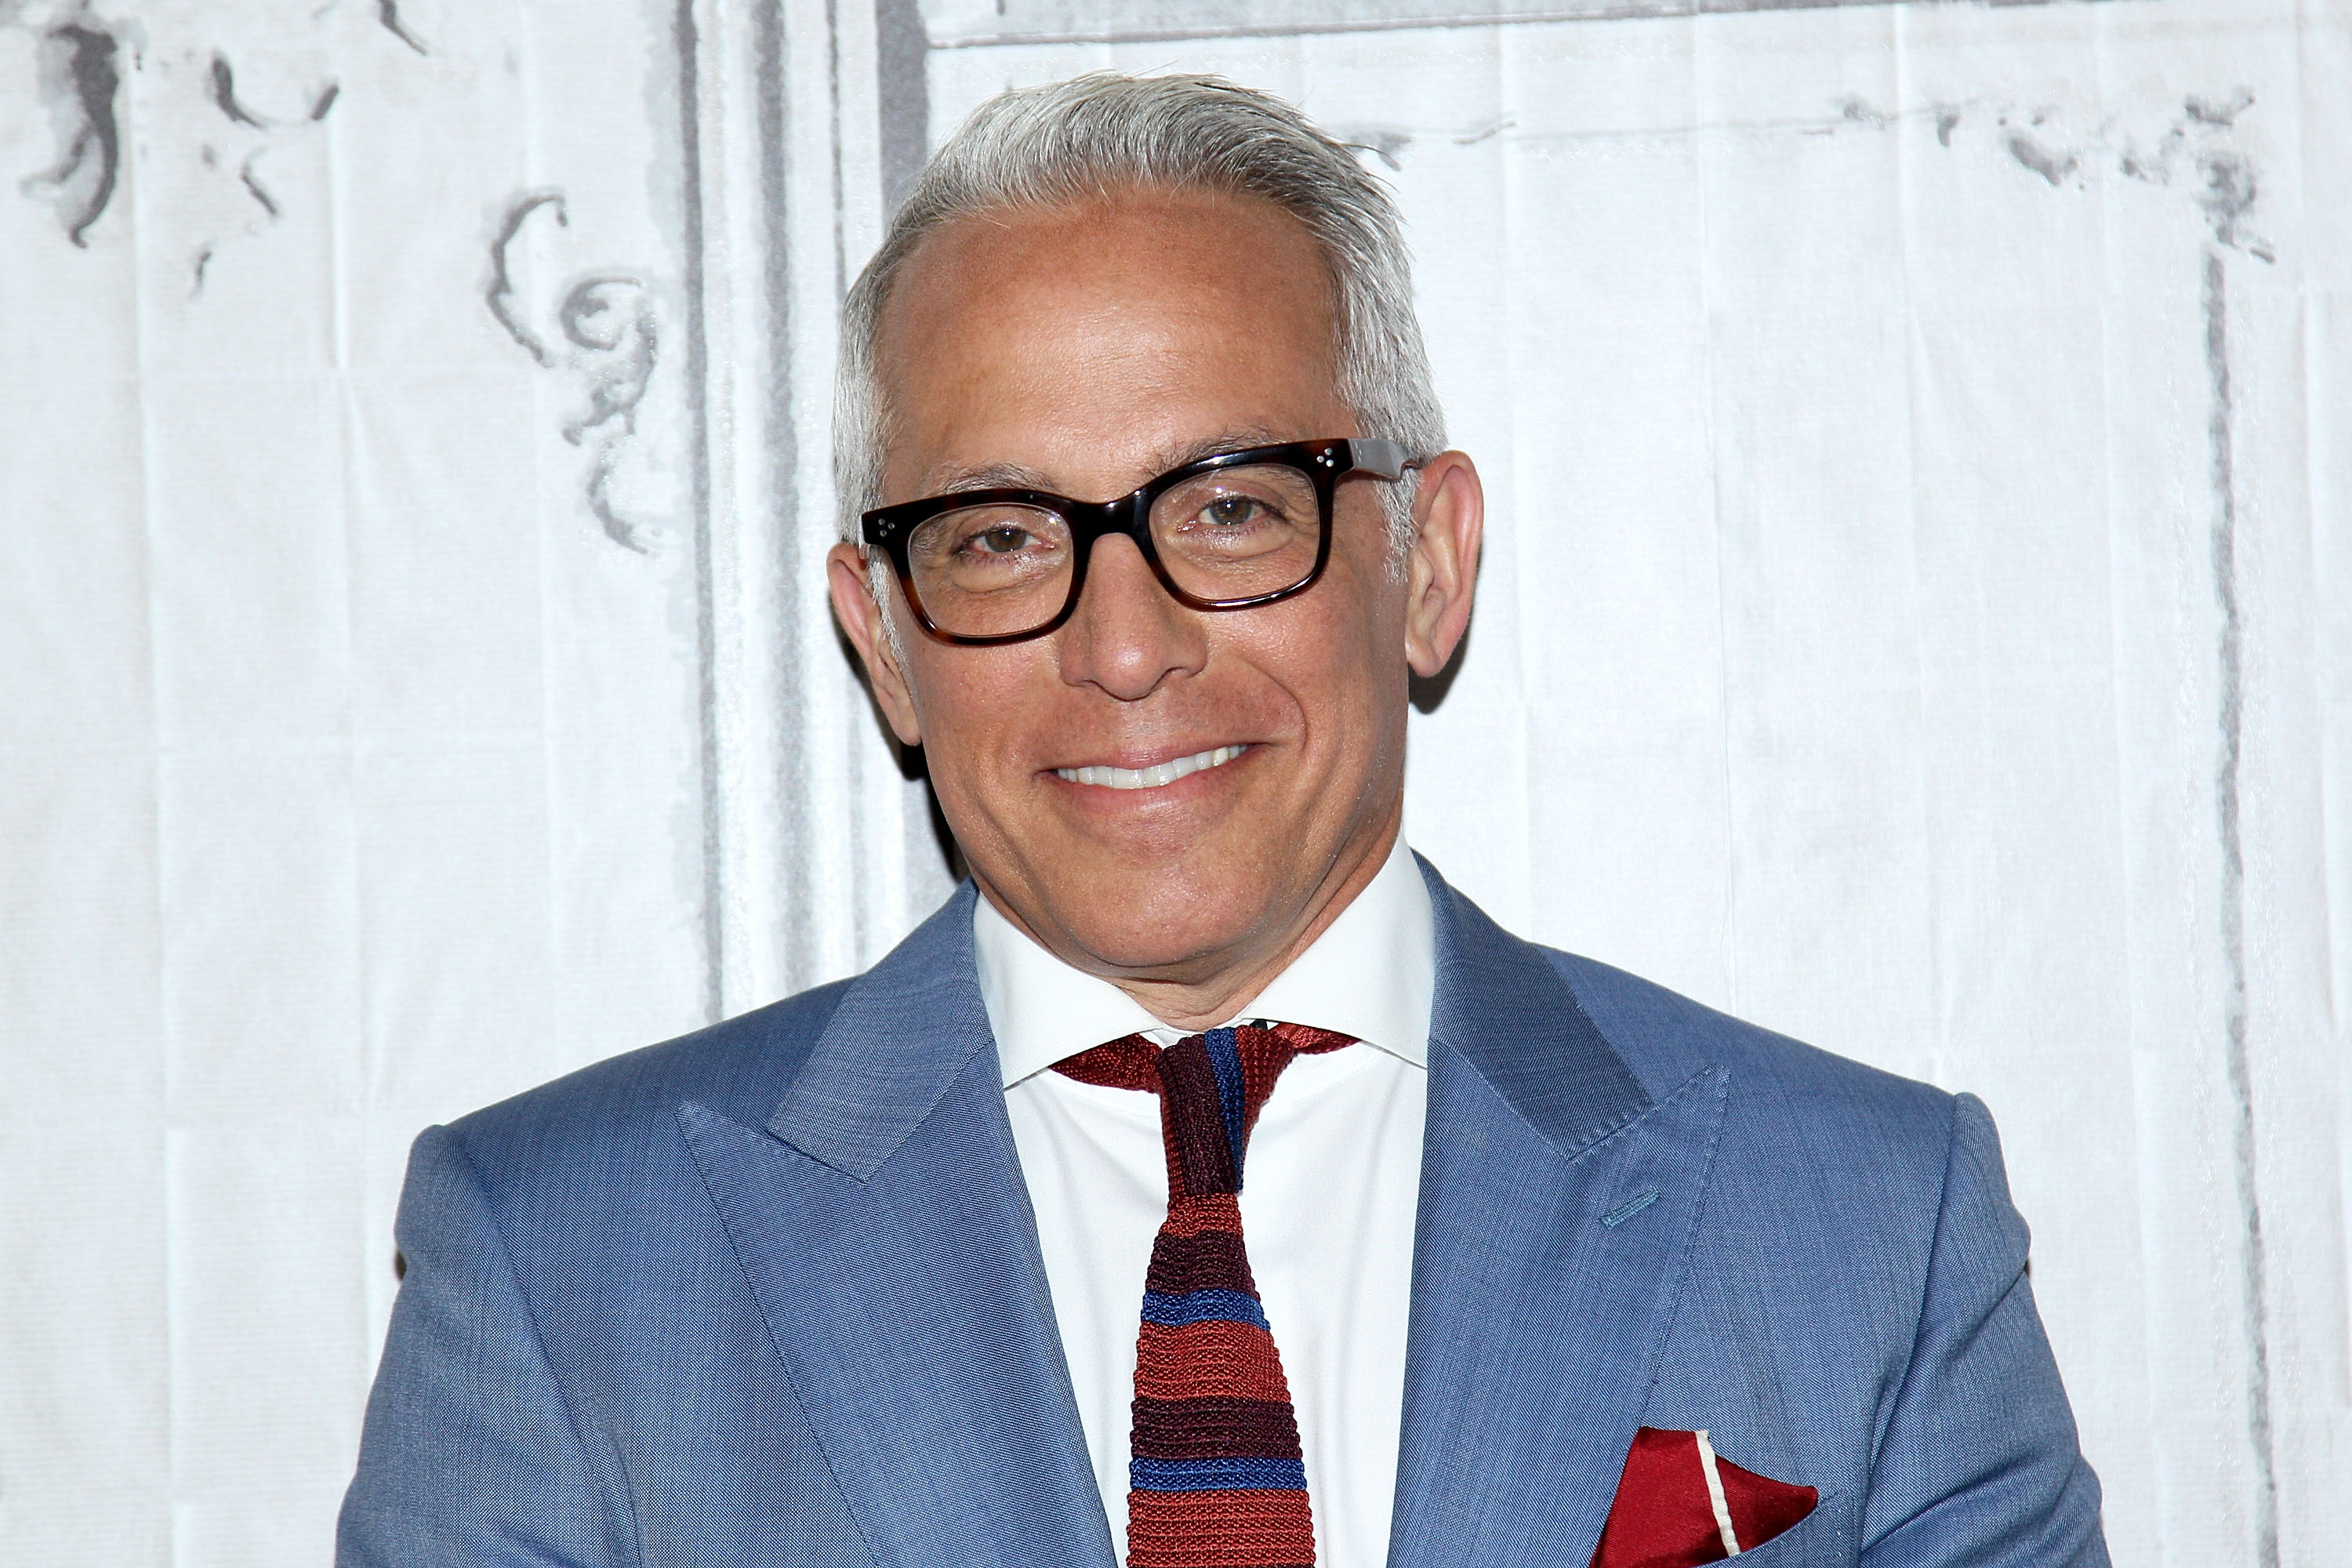 Excited to be back at QVC today. My - Geoffrey Zakarian